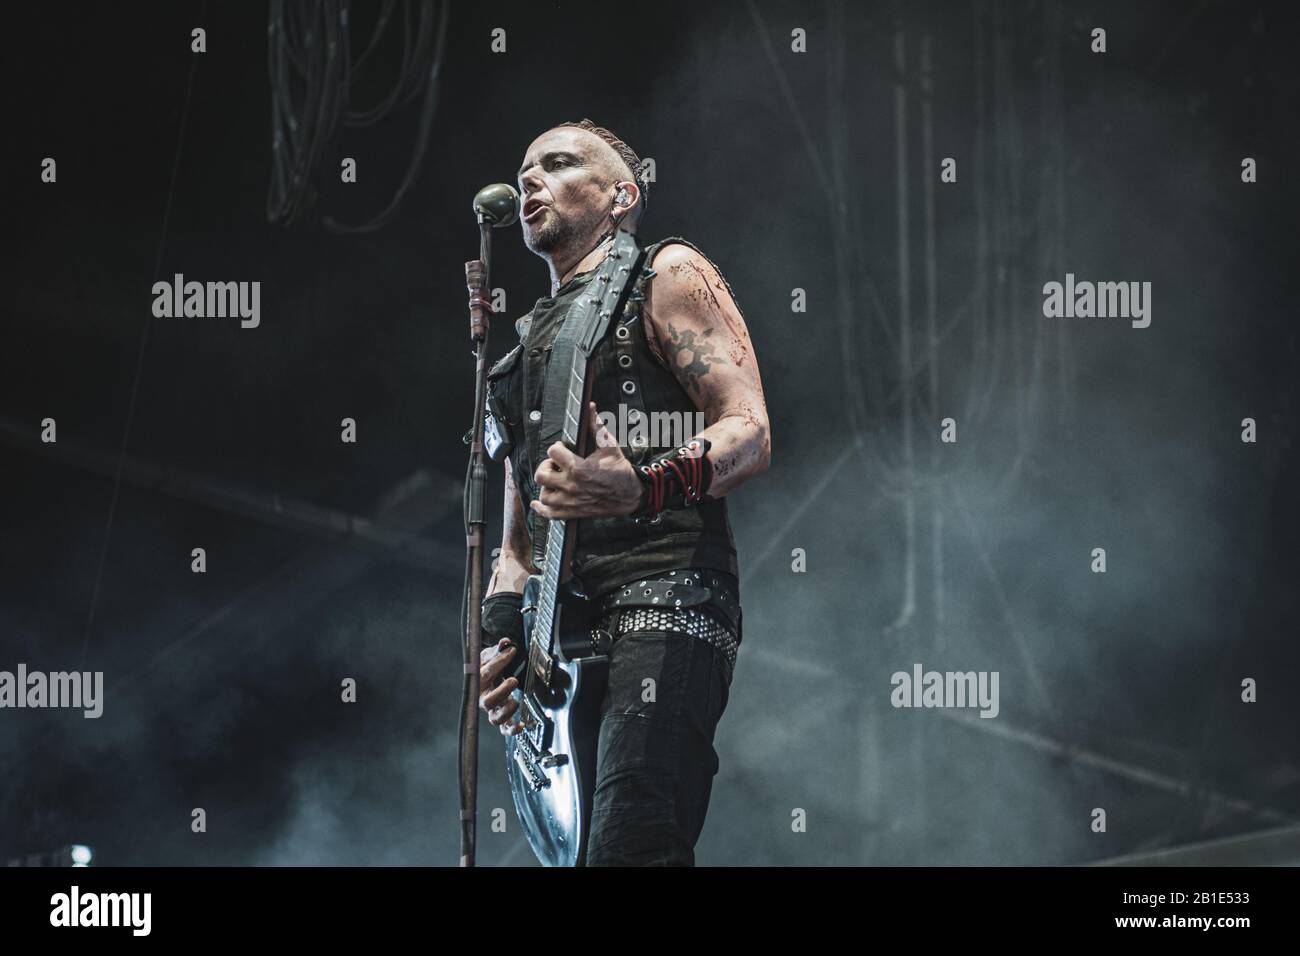 Dykker whisky Materialisme Horsens, Denmark. 25th, May 2017. Rammstein, the German industrial metal  band, performs a live concert at Horsens Prison in Horsens. Here guitarist  Paul Landers is seen live on stage. (Photo credit: Gonzales